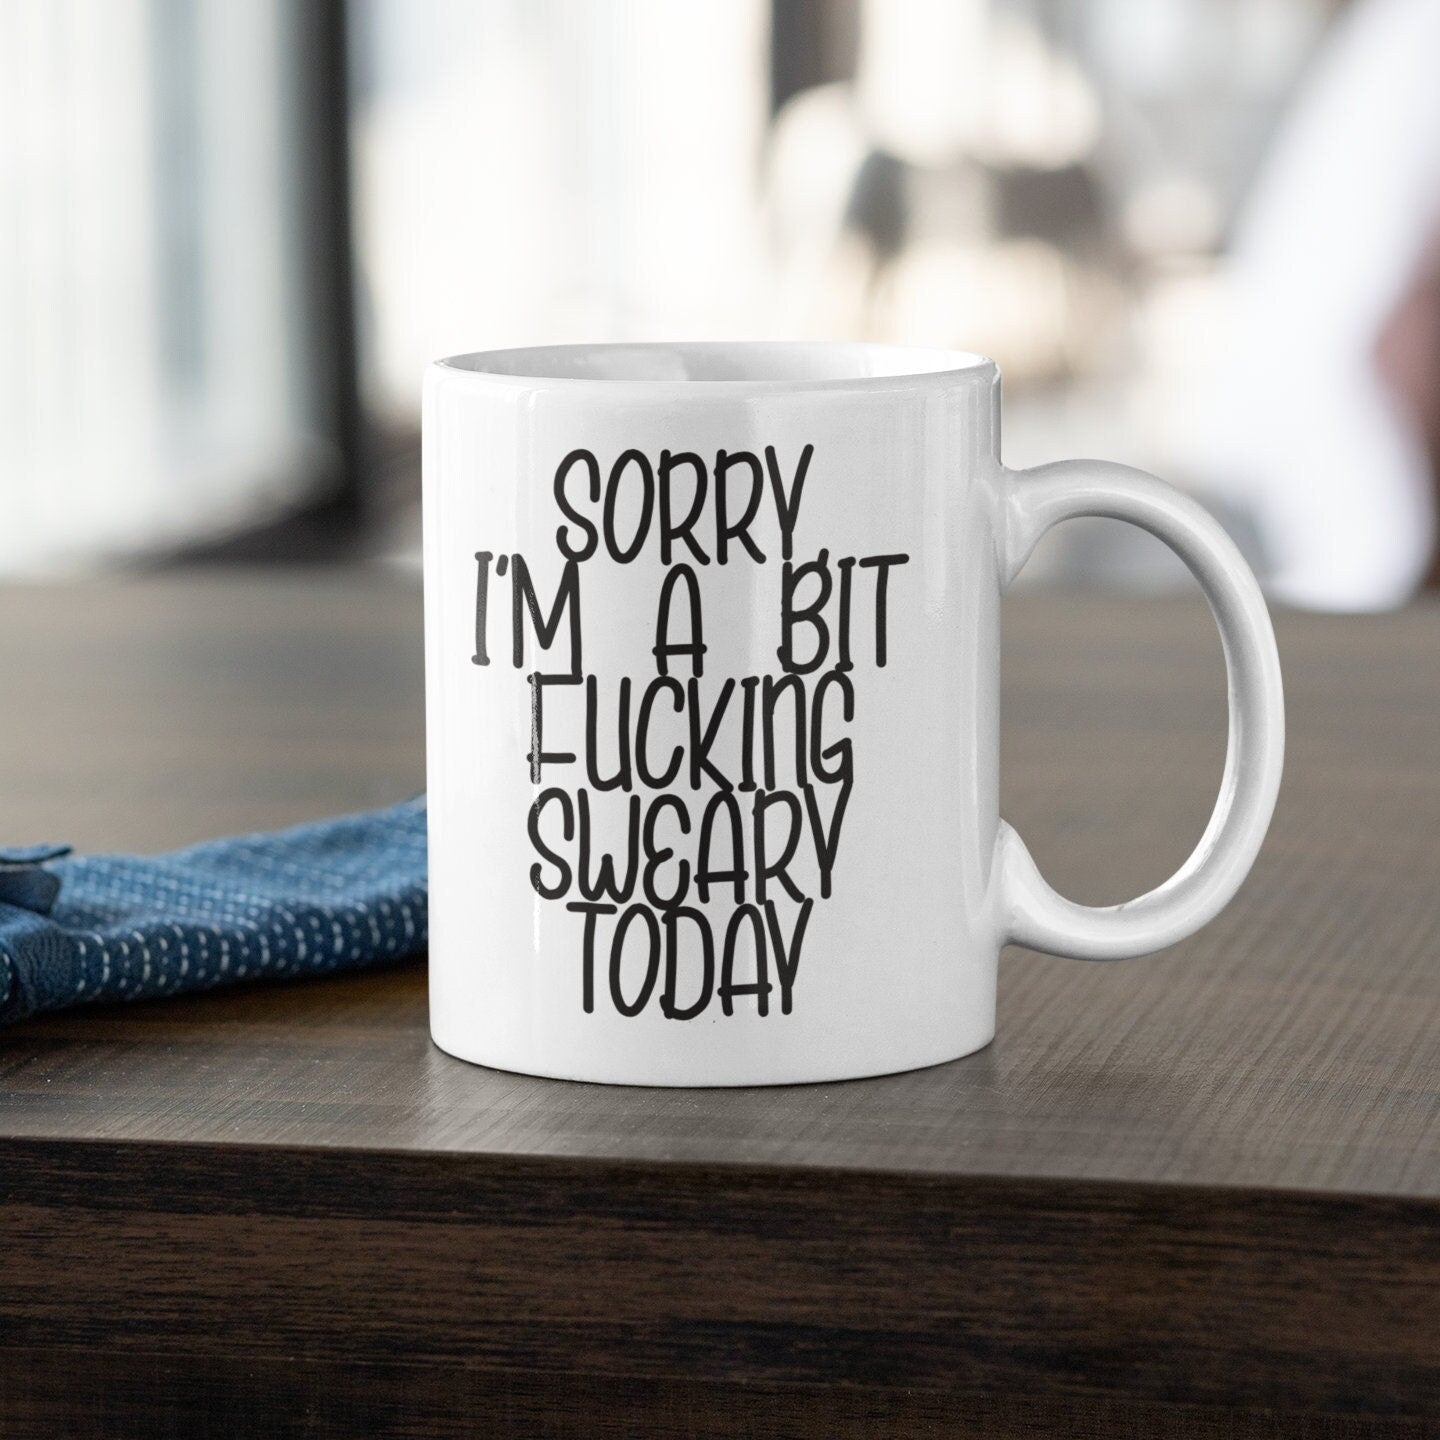 A white ceramic mug with a black handle, featuring the funny quote 'sorry i'm a bit fucking swearing today'. Printed in black ink.